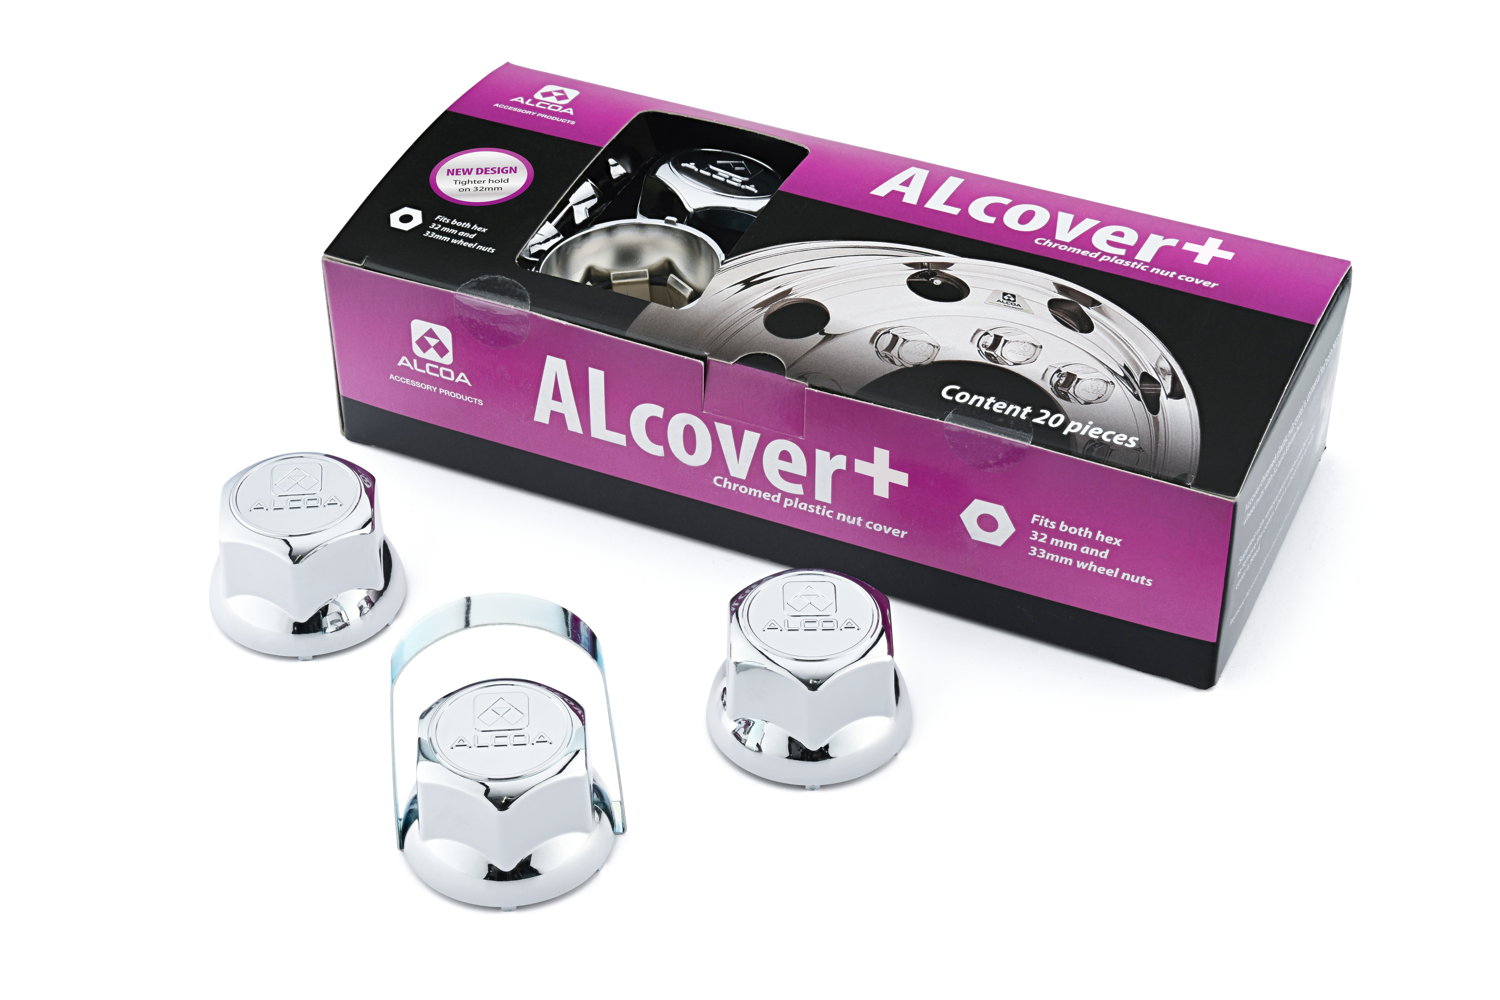 Alcover+_box_and_Alcover+_3pc_and_clip